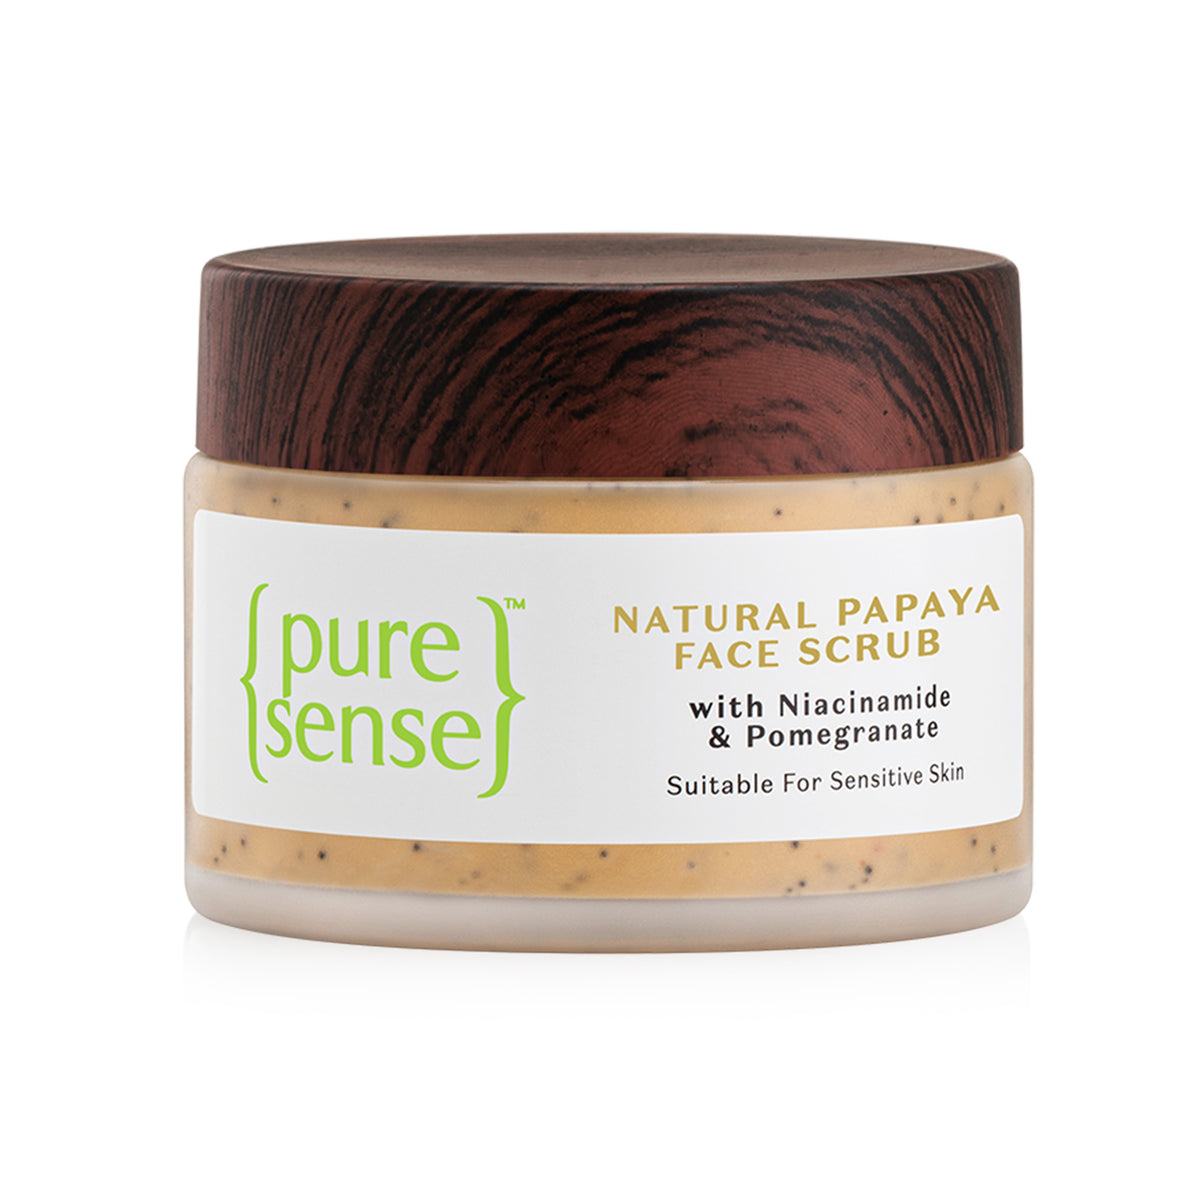 Natural Papaya Face Scrub (Pack of 2) | From the makers of Parachute Advansed | 100ml - PureSense